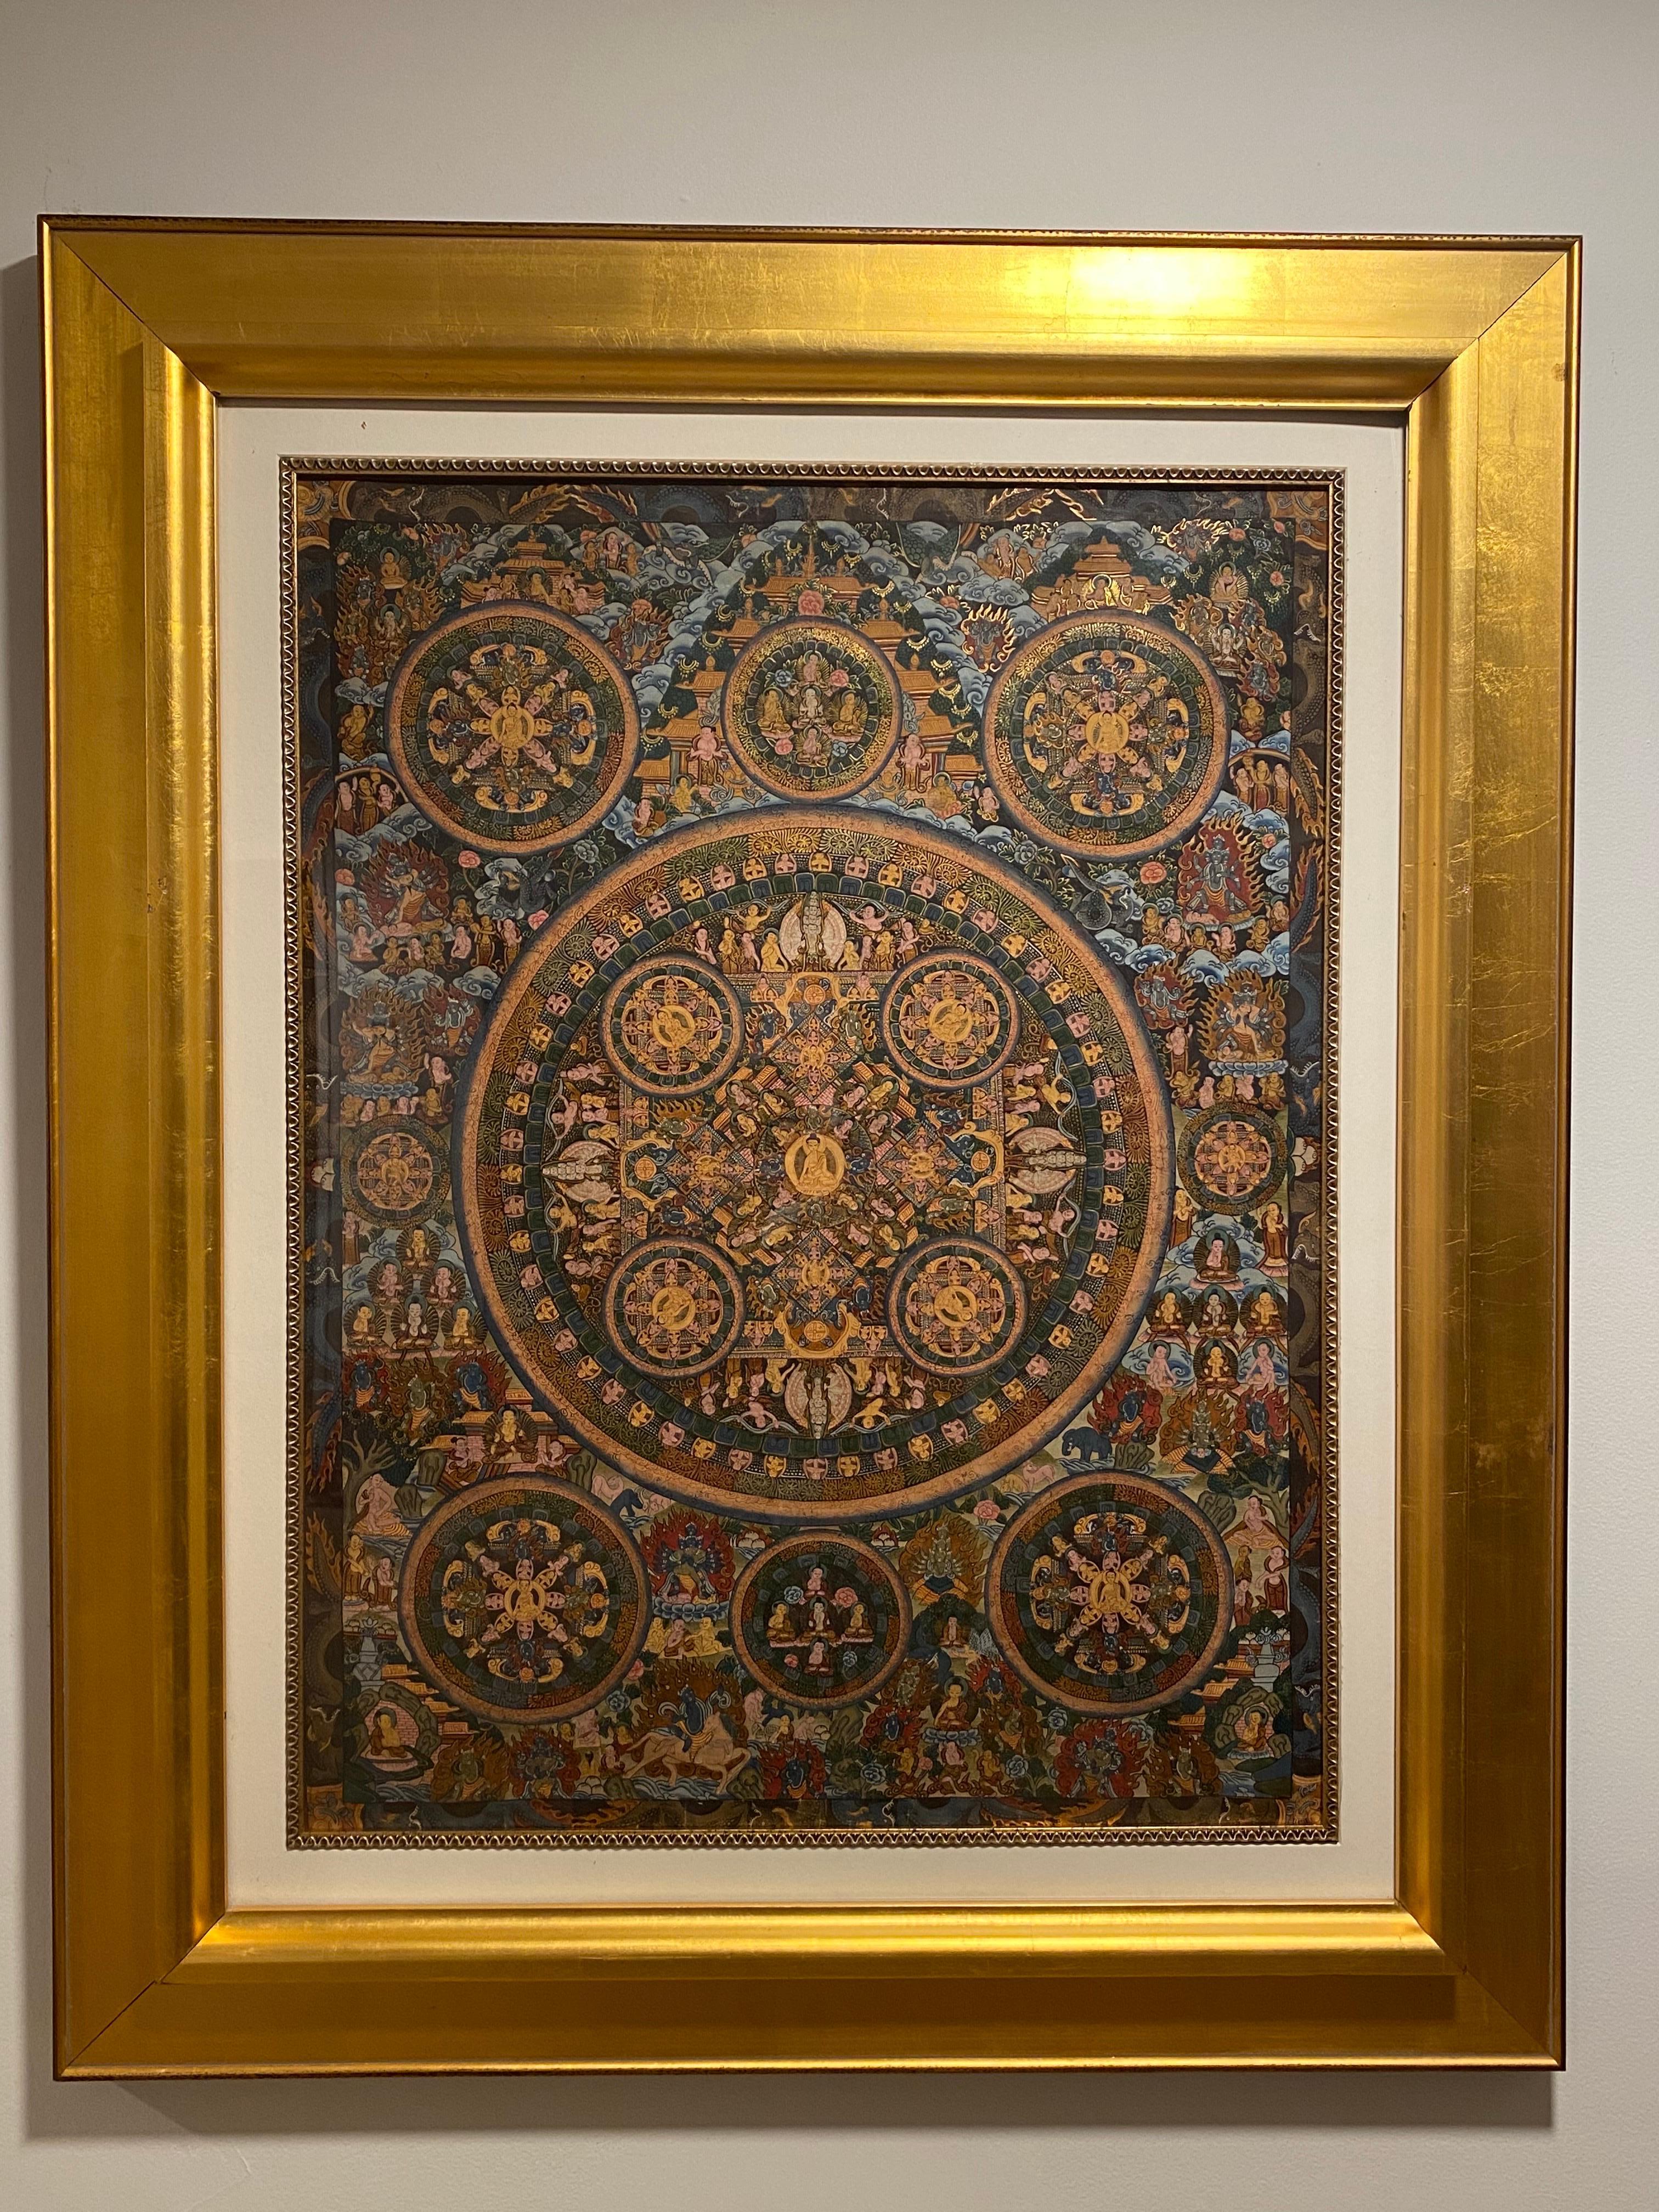 Framed Hand Painted  on Canvas Mandala Thangka 24K Gold - Other Art Style Art by Unknown